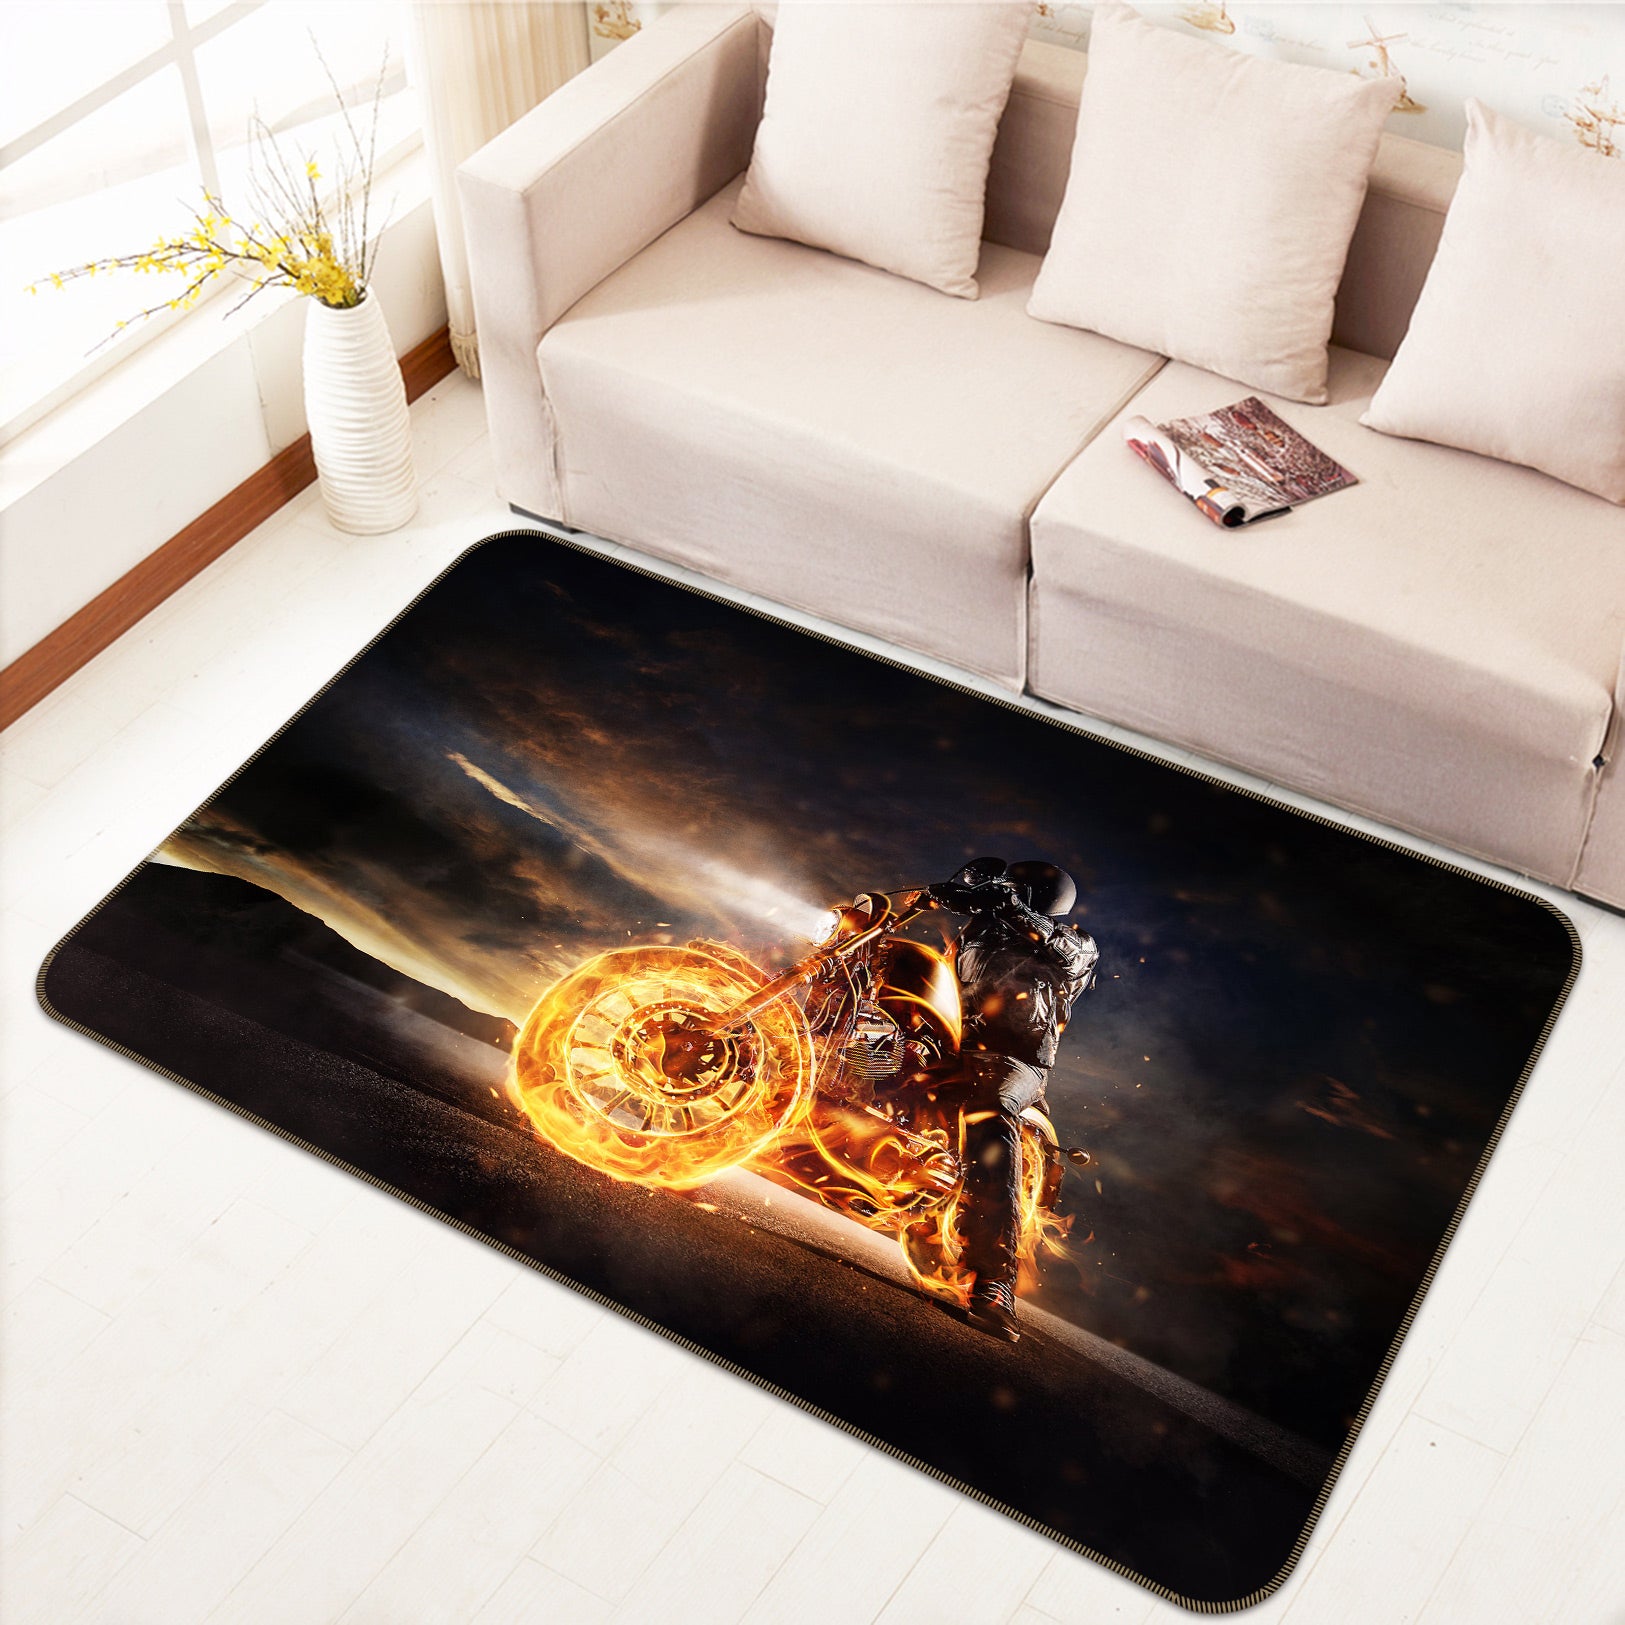 3D Flame Motorcycle 68007 Vehicle Non Slip Rug Mat